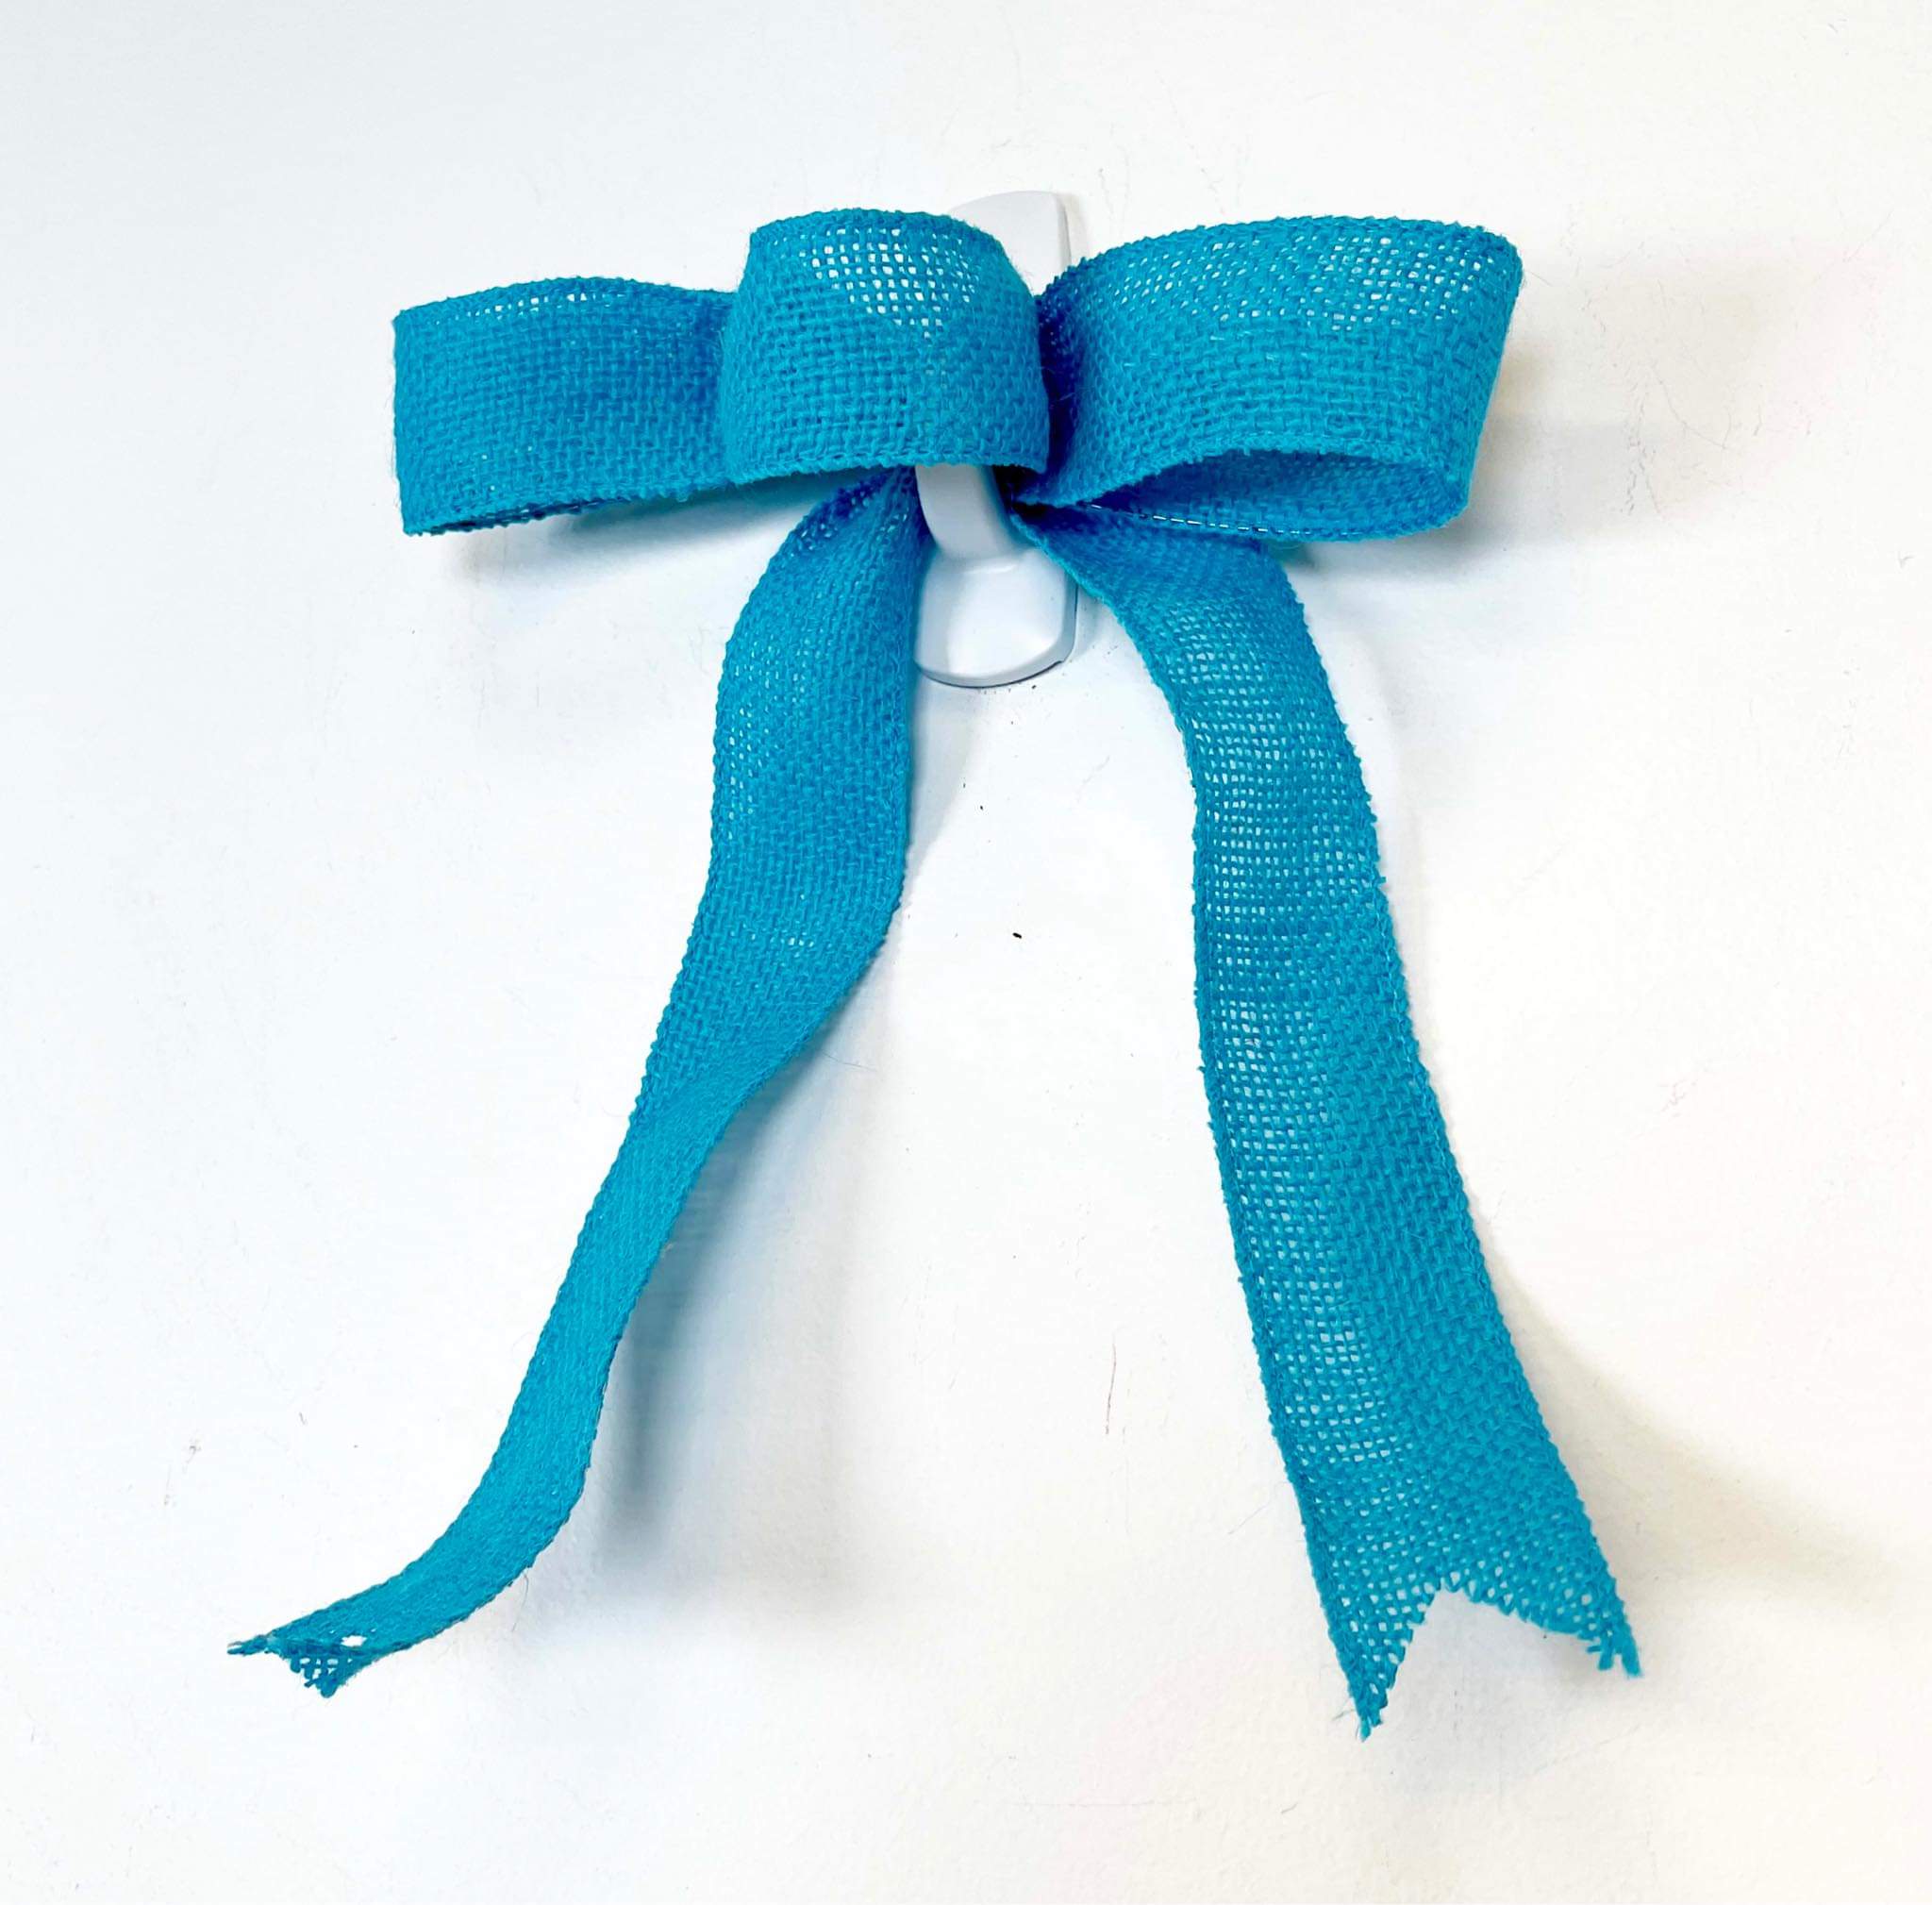 How to make a bow in the Mini Bowdabra on Vimeo